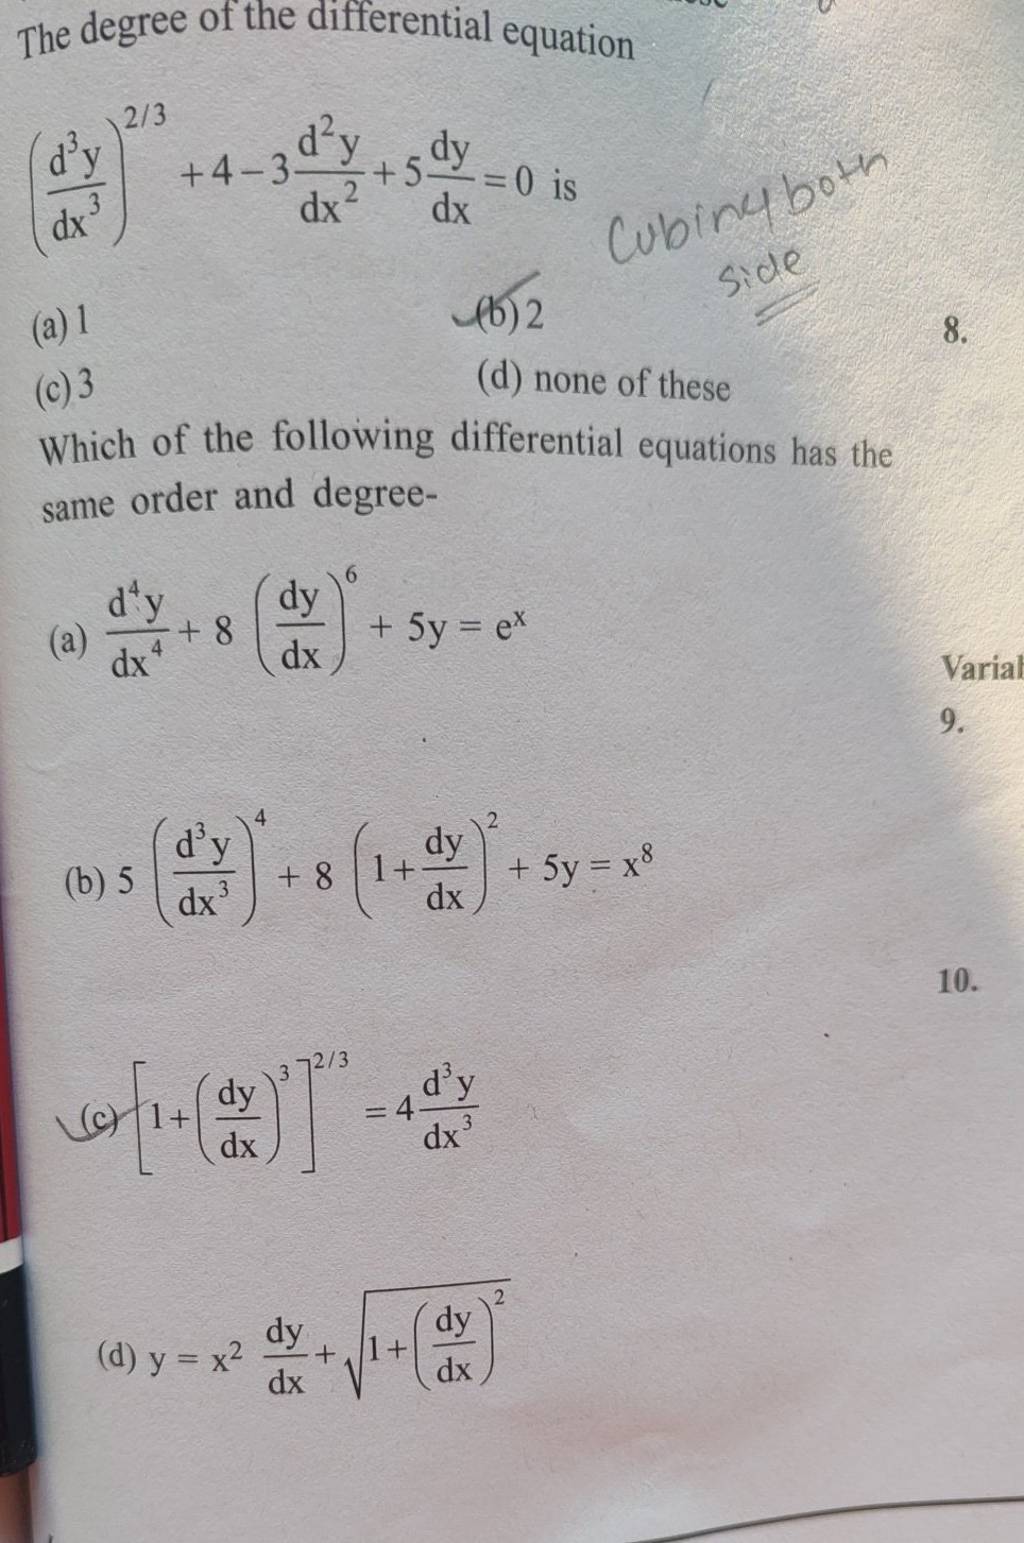 Which of the following differential equations has the same order and d